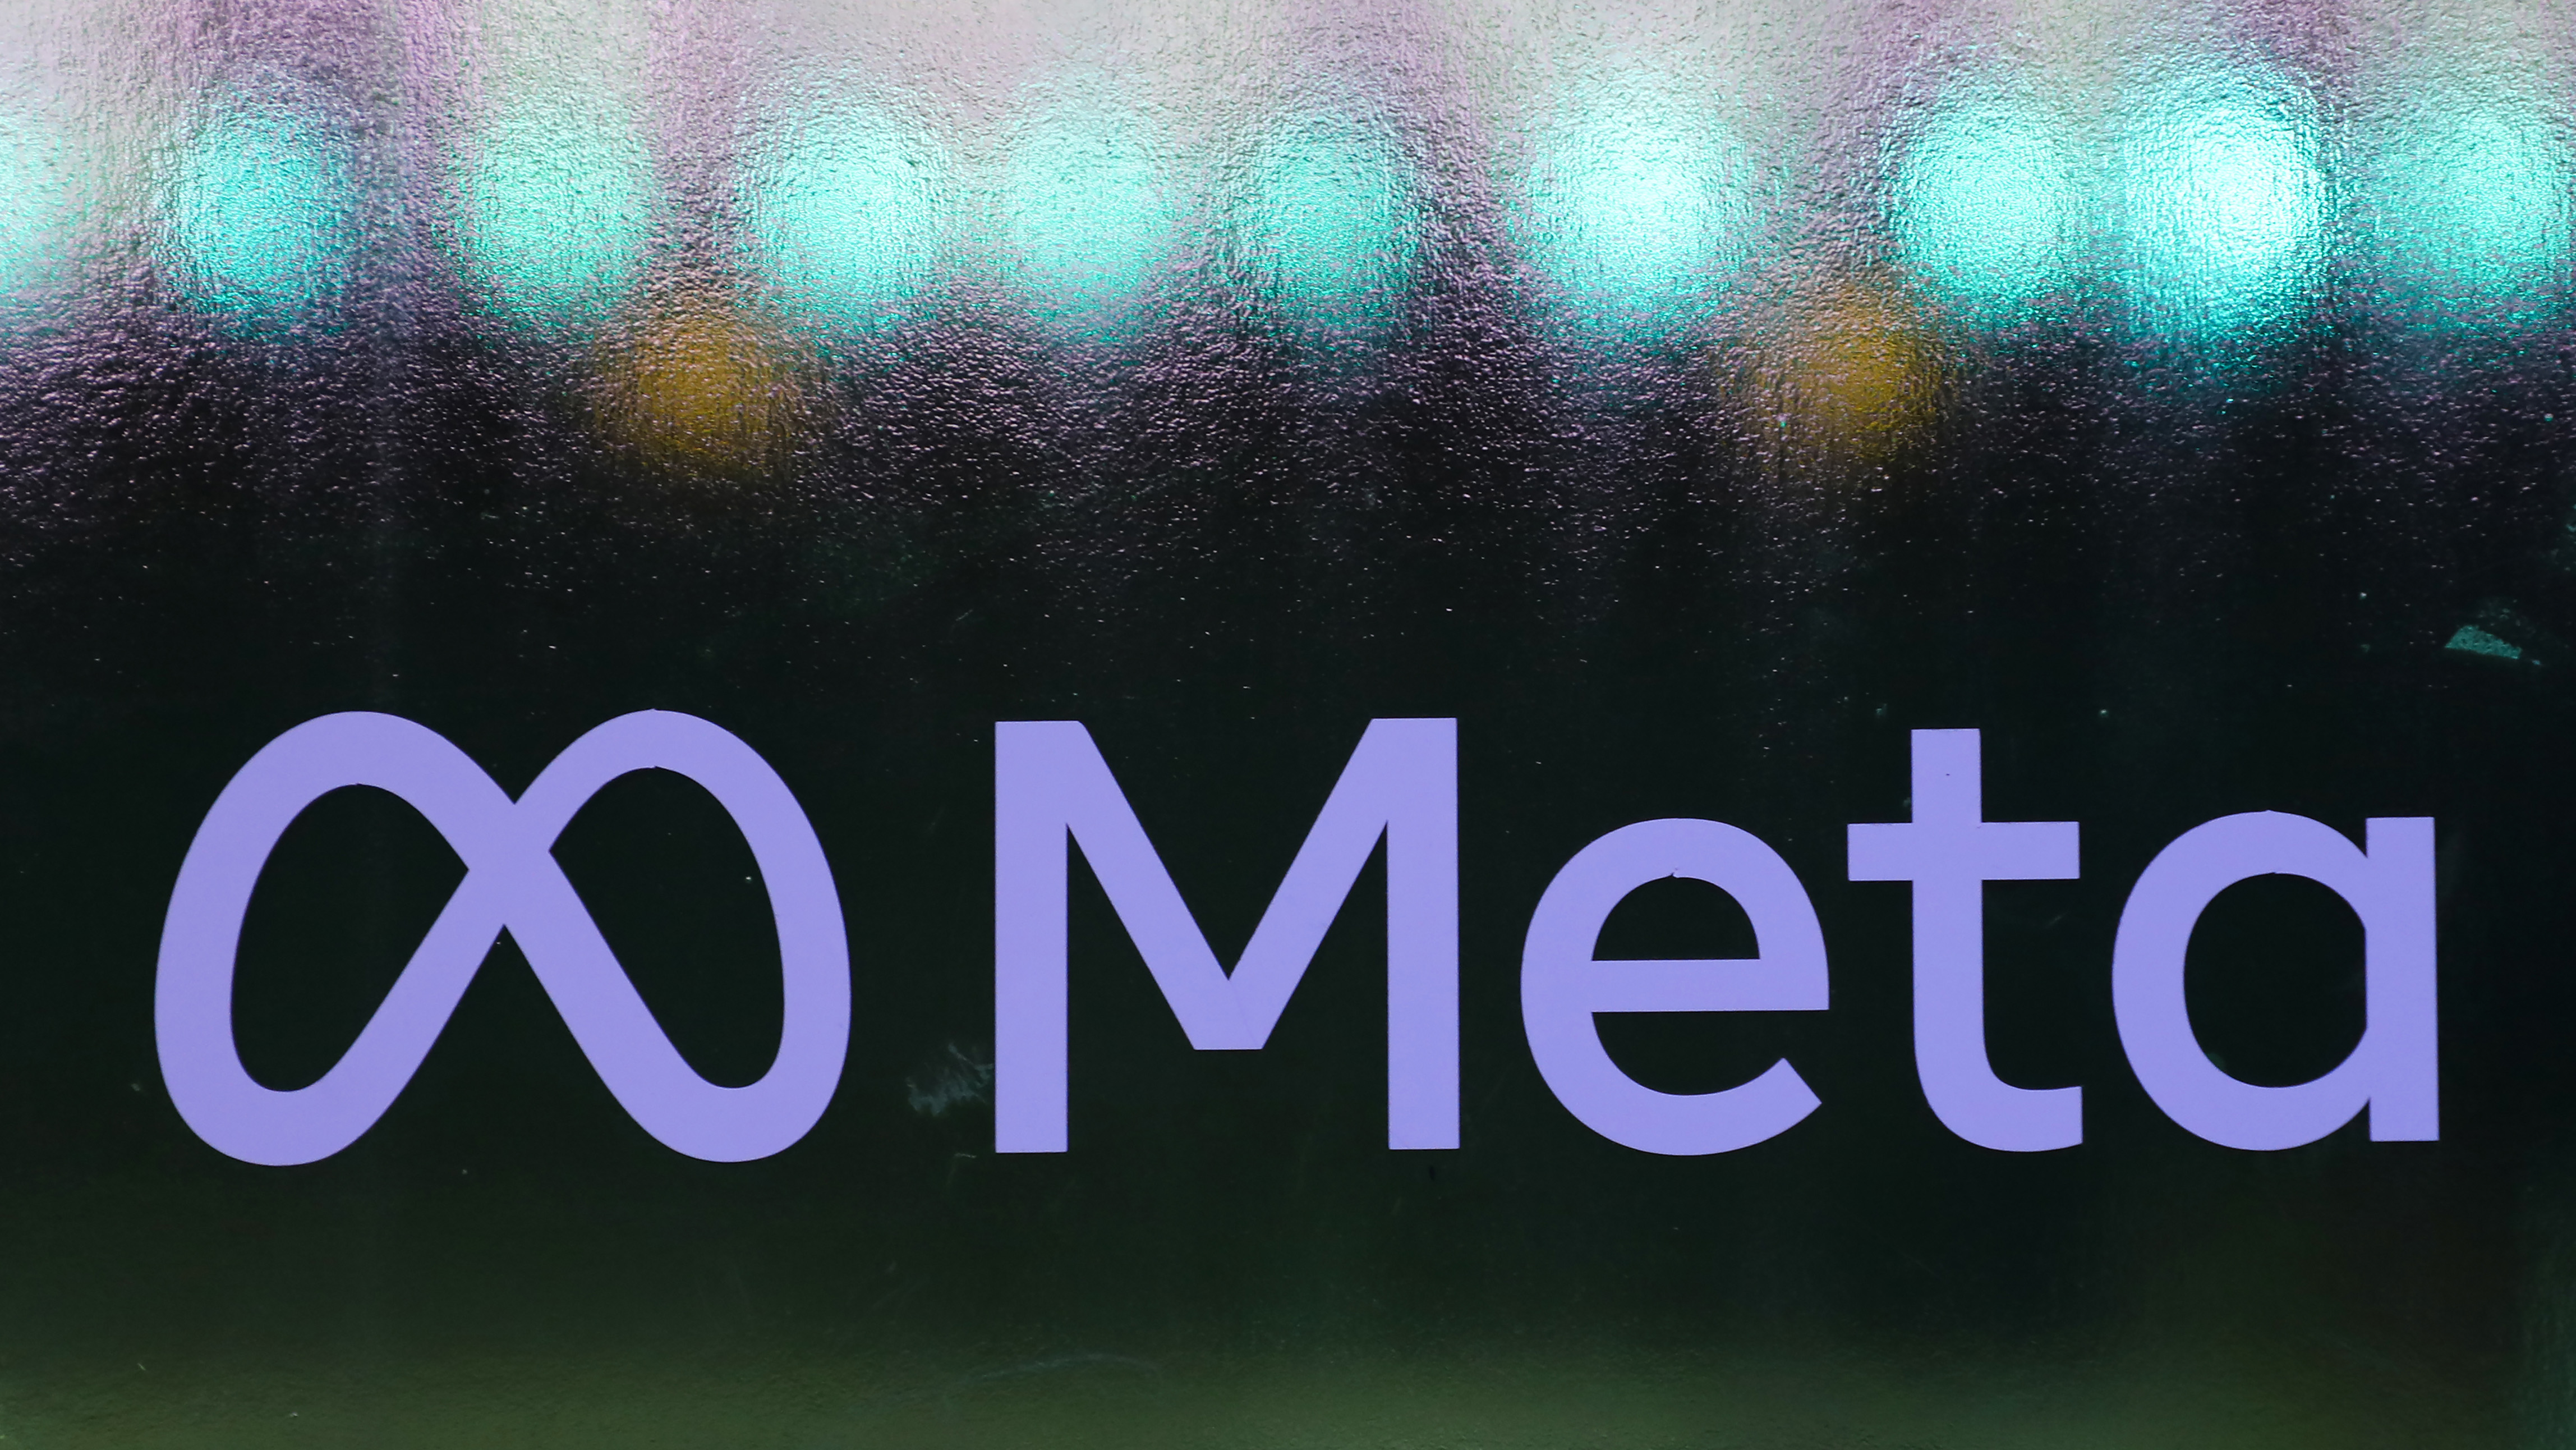 The Meta logo (a stylized 'M' next to the word 'Meta) written in blue on a frosted glass window, with blue lights visible behind the glass.